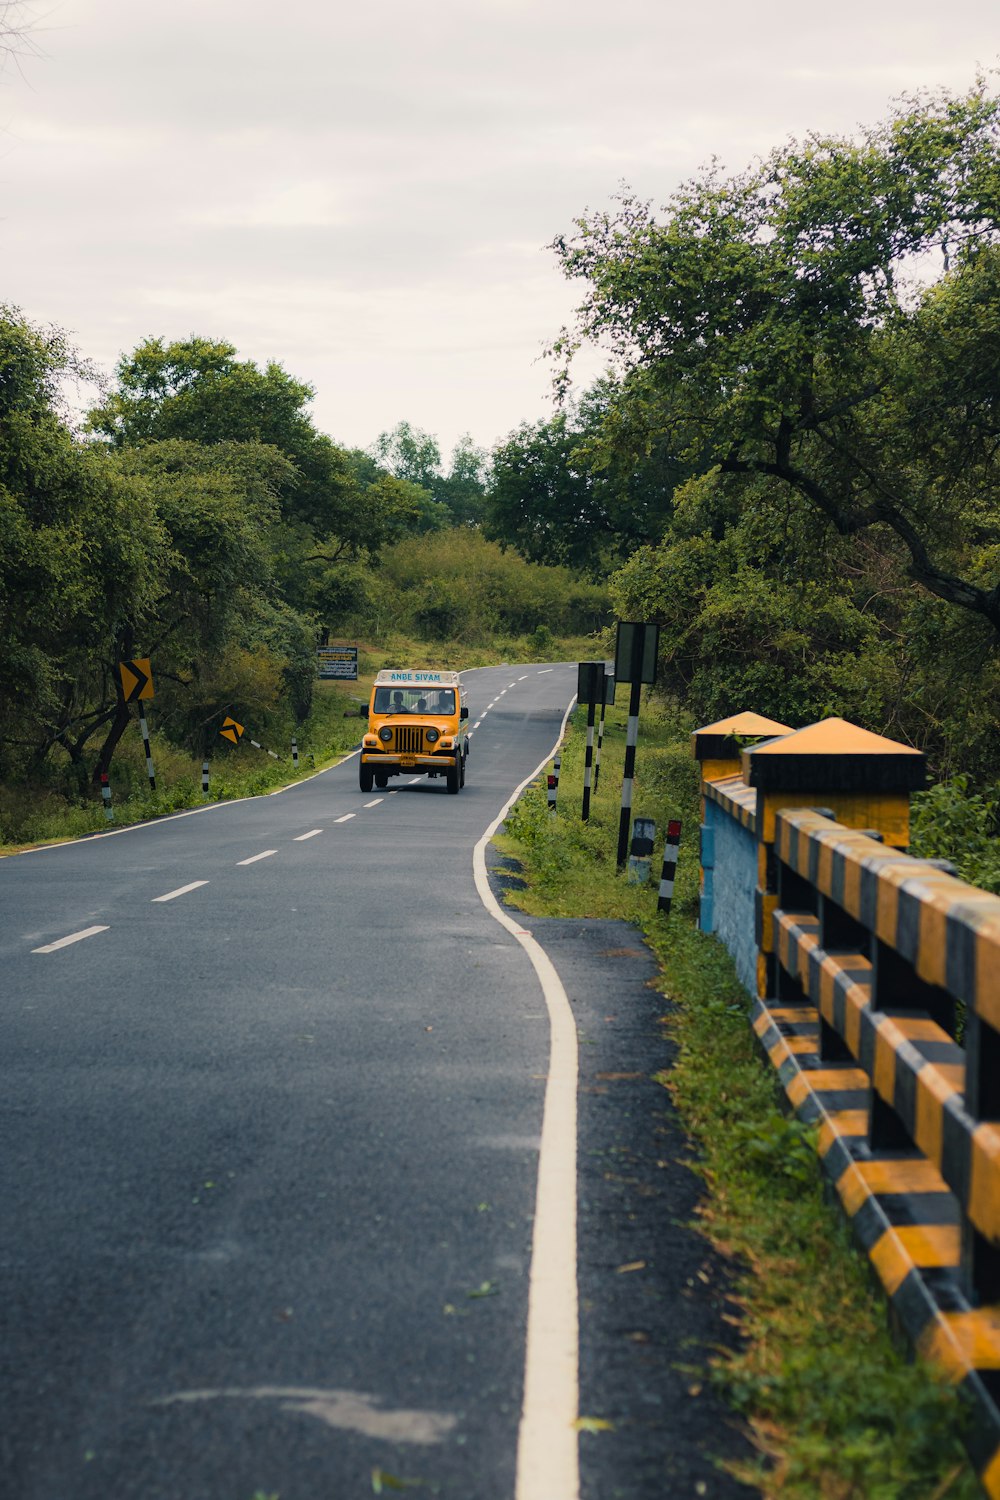 a yellow school bus driving down a rural road